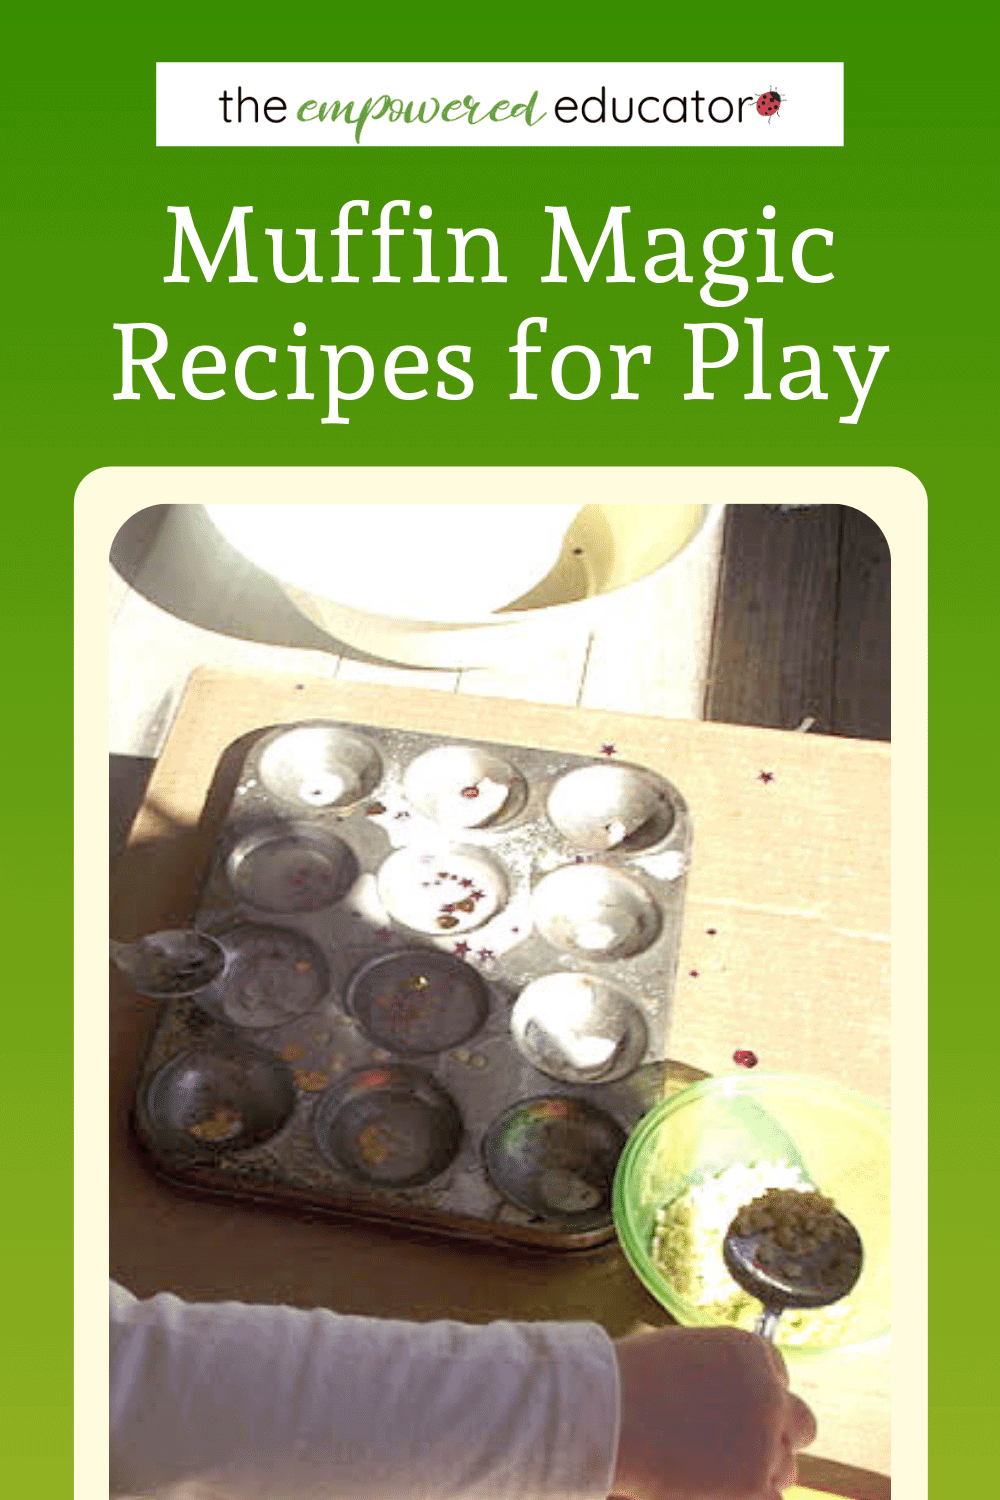 muffin magic recipes for play